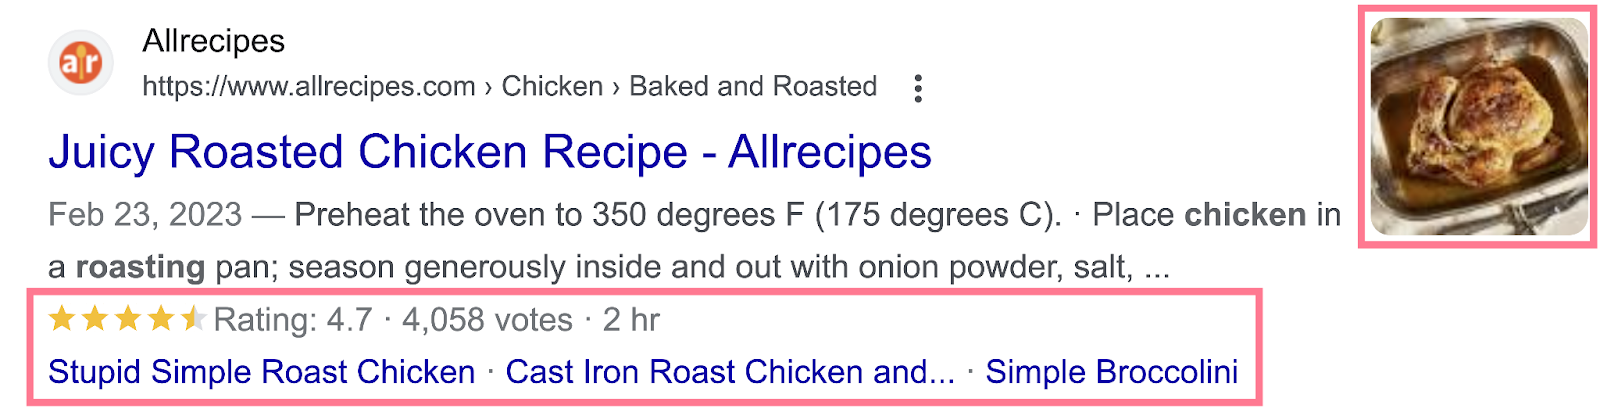 an example of a Google rich snippet for "Allrecipes"